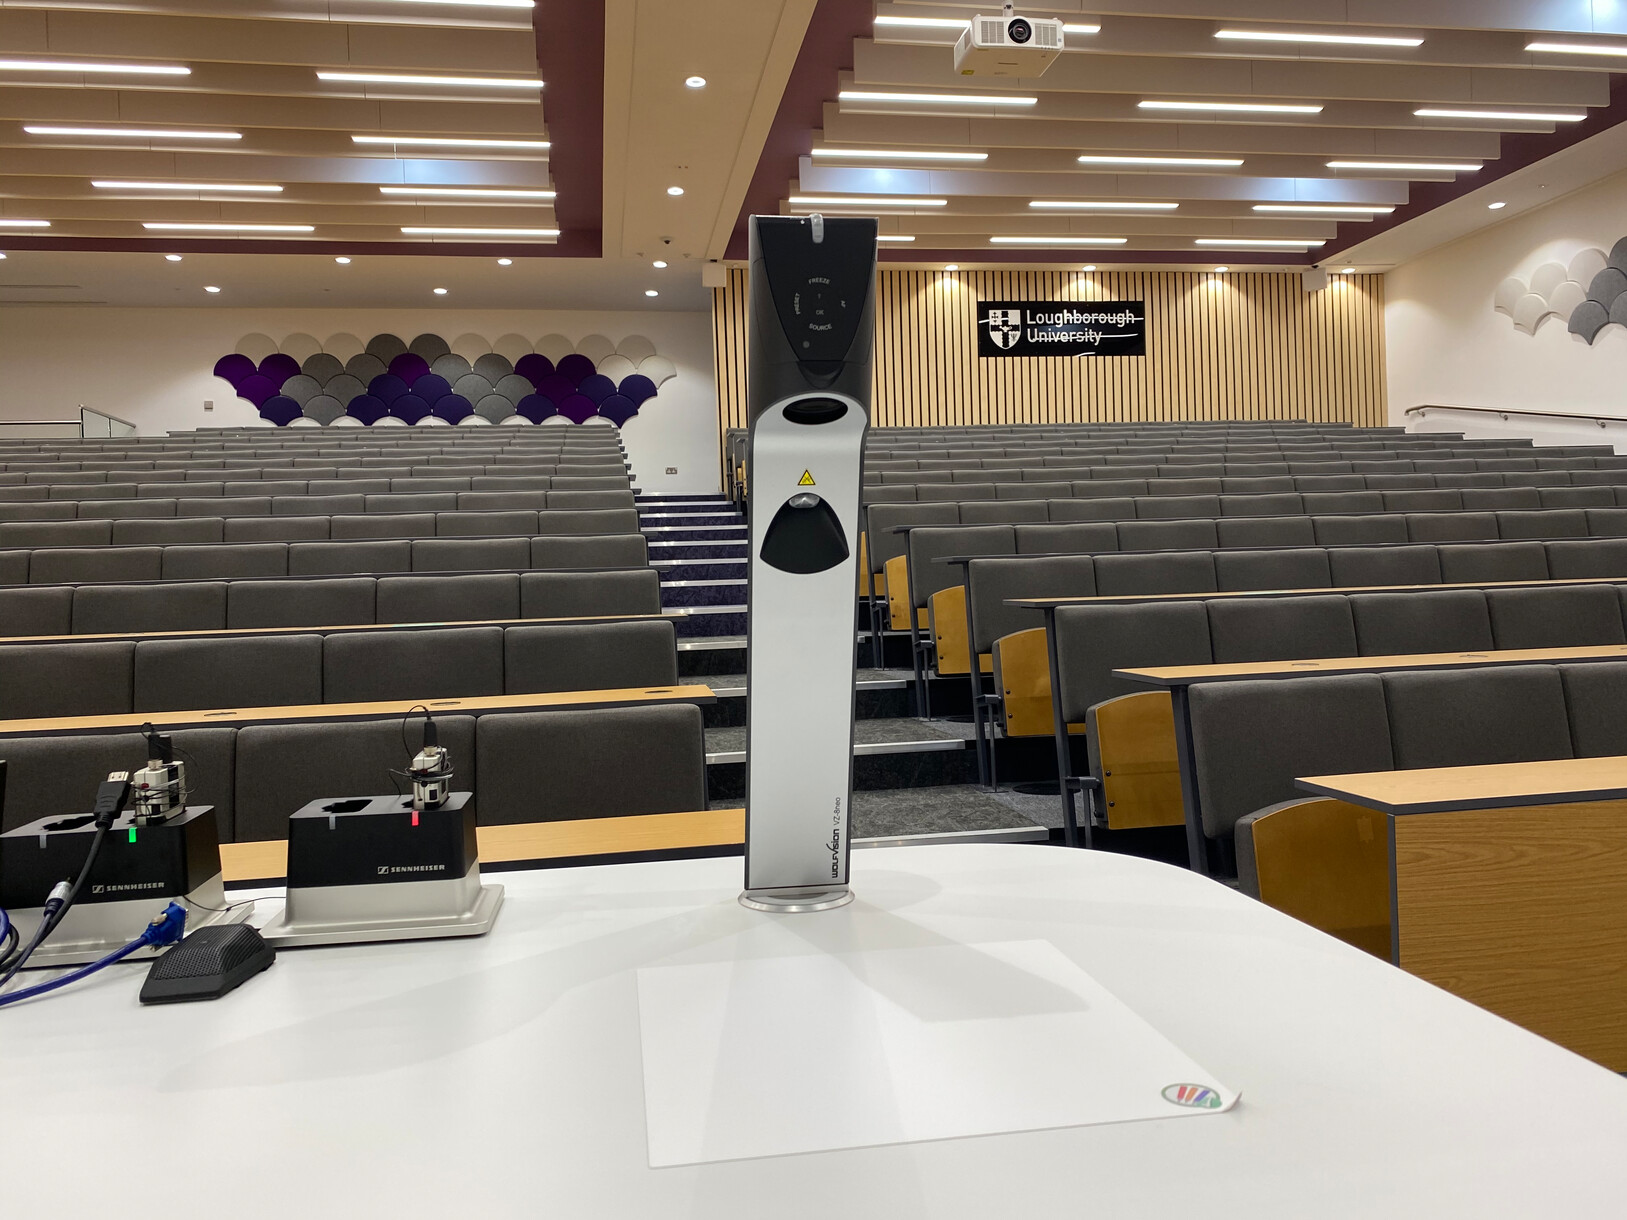 Self-adhesive, dry-erase working surfaces attached directly to the lectern offer a non-reflective “digital whiteboard” surface.